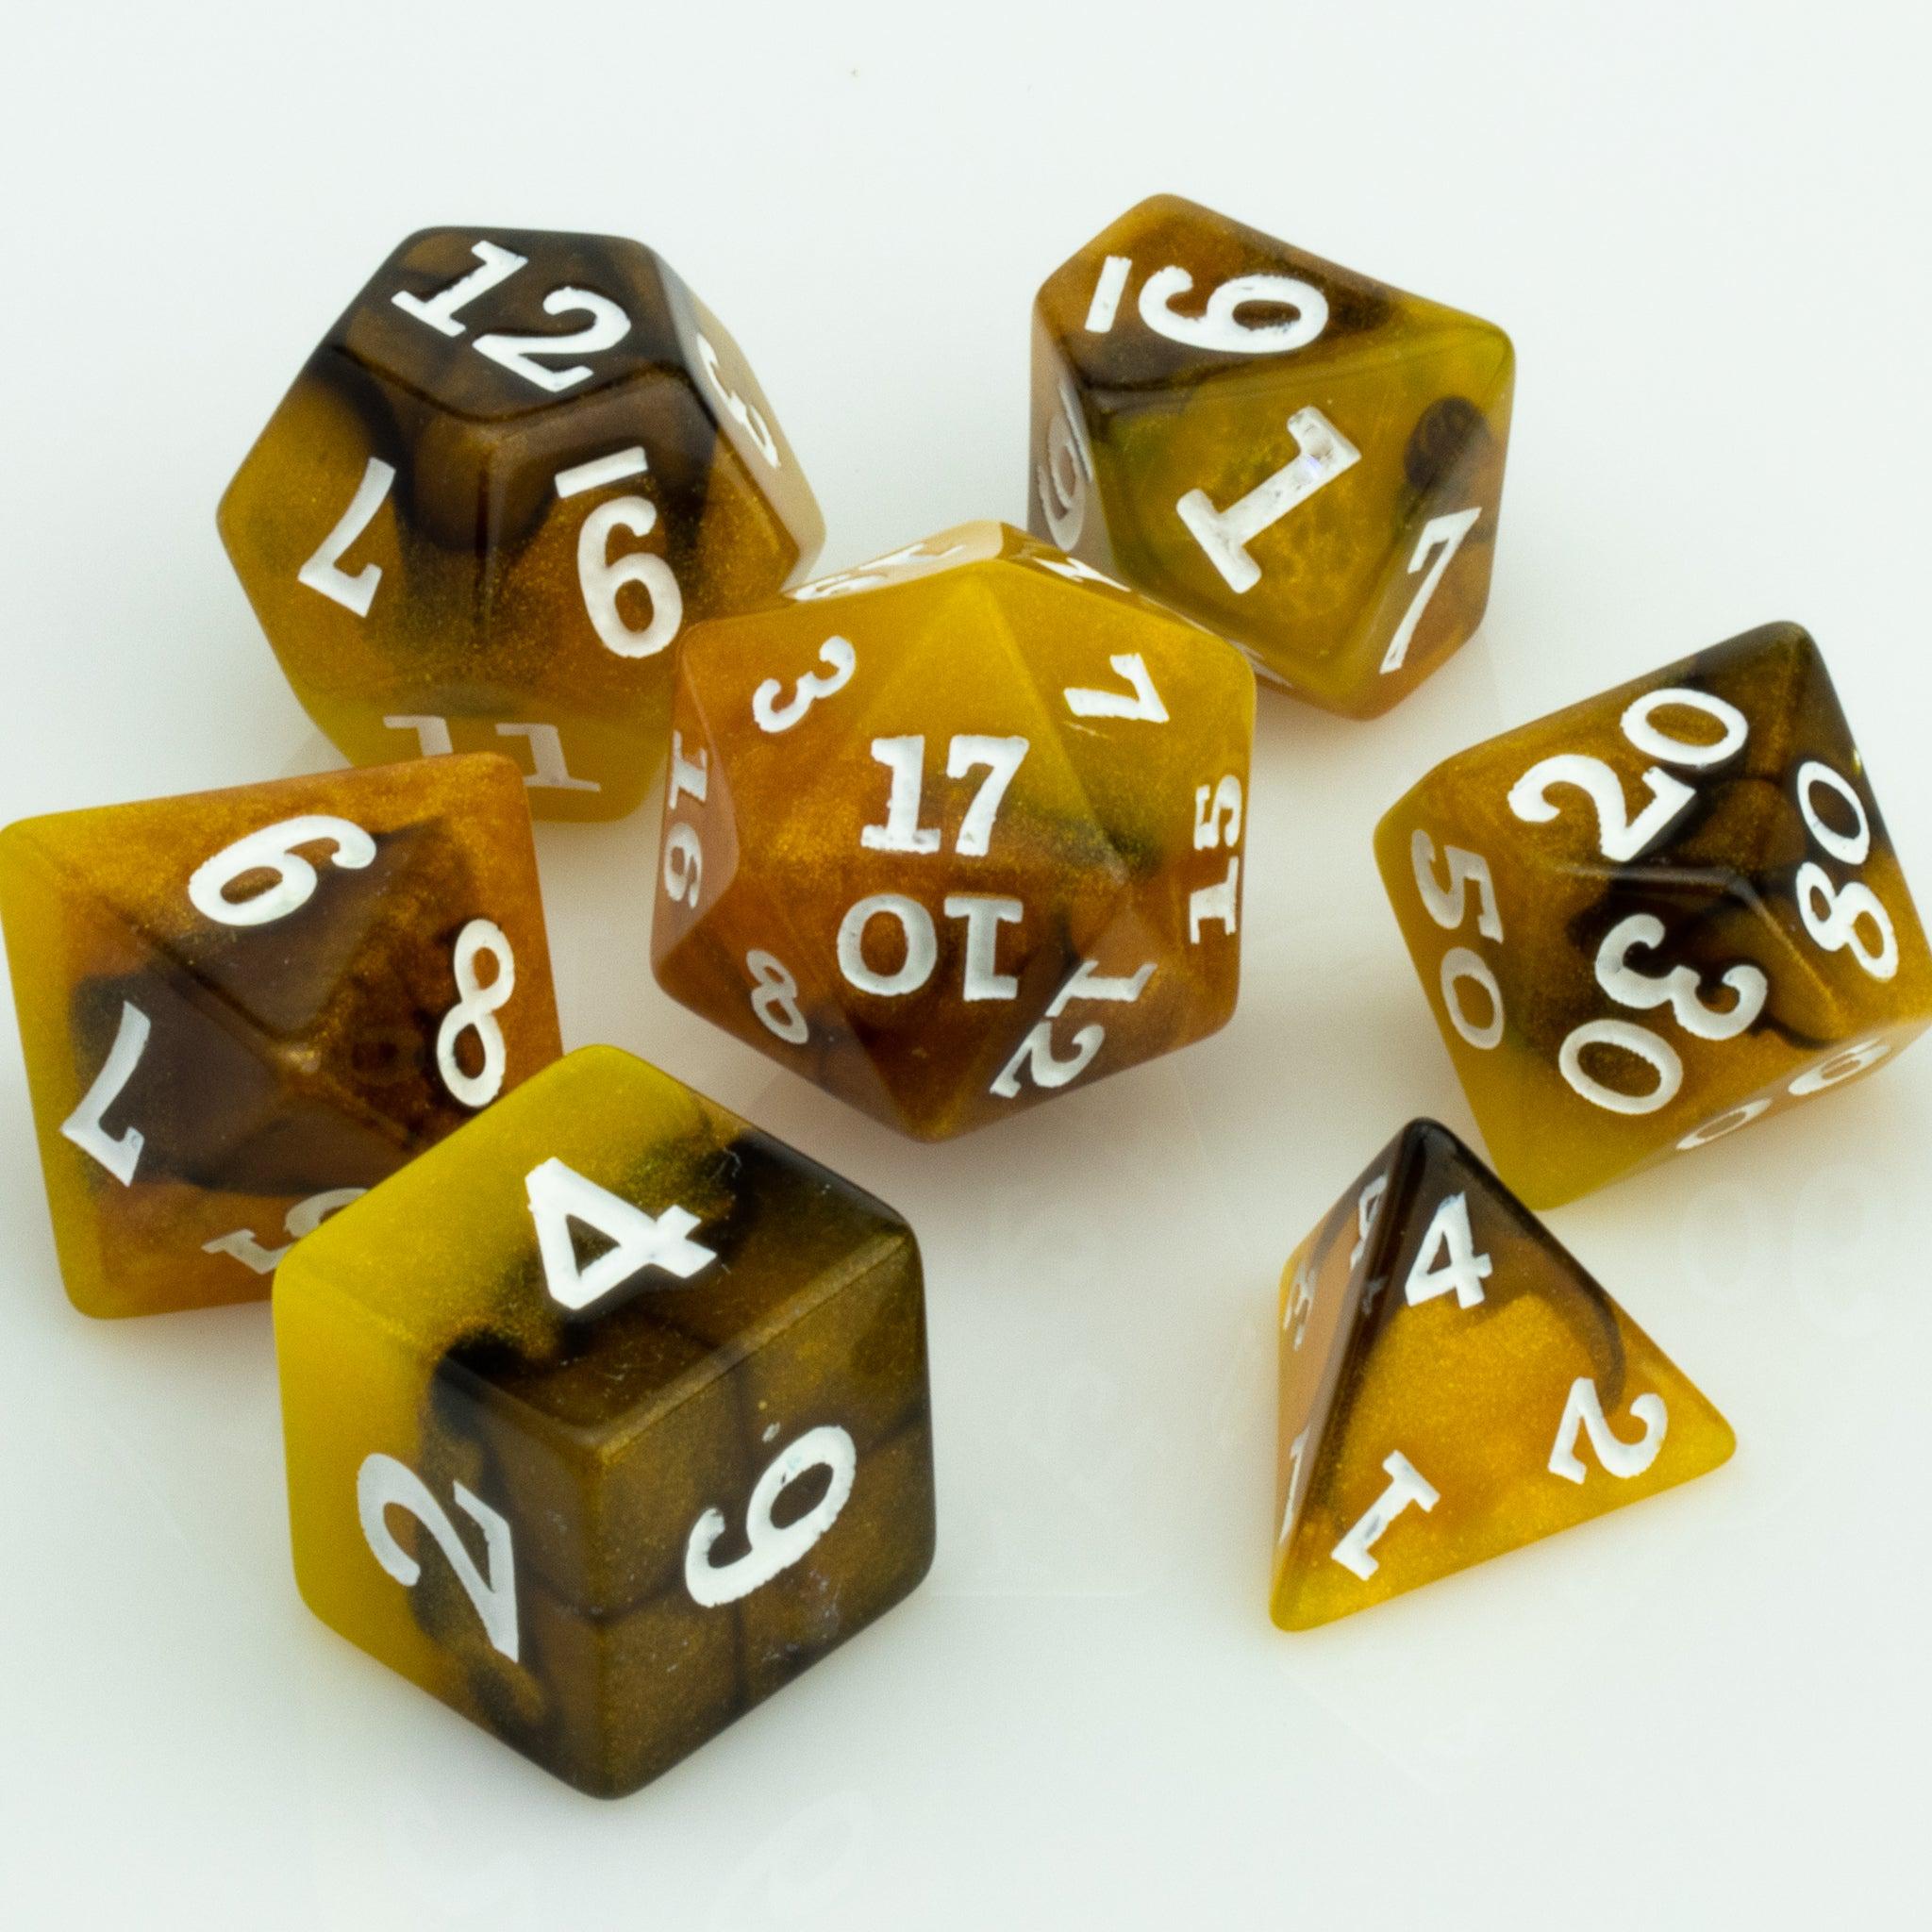 Scorch, yellow, brown and black resin DND dice 7 piece set on white background.